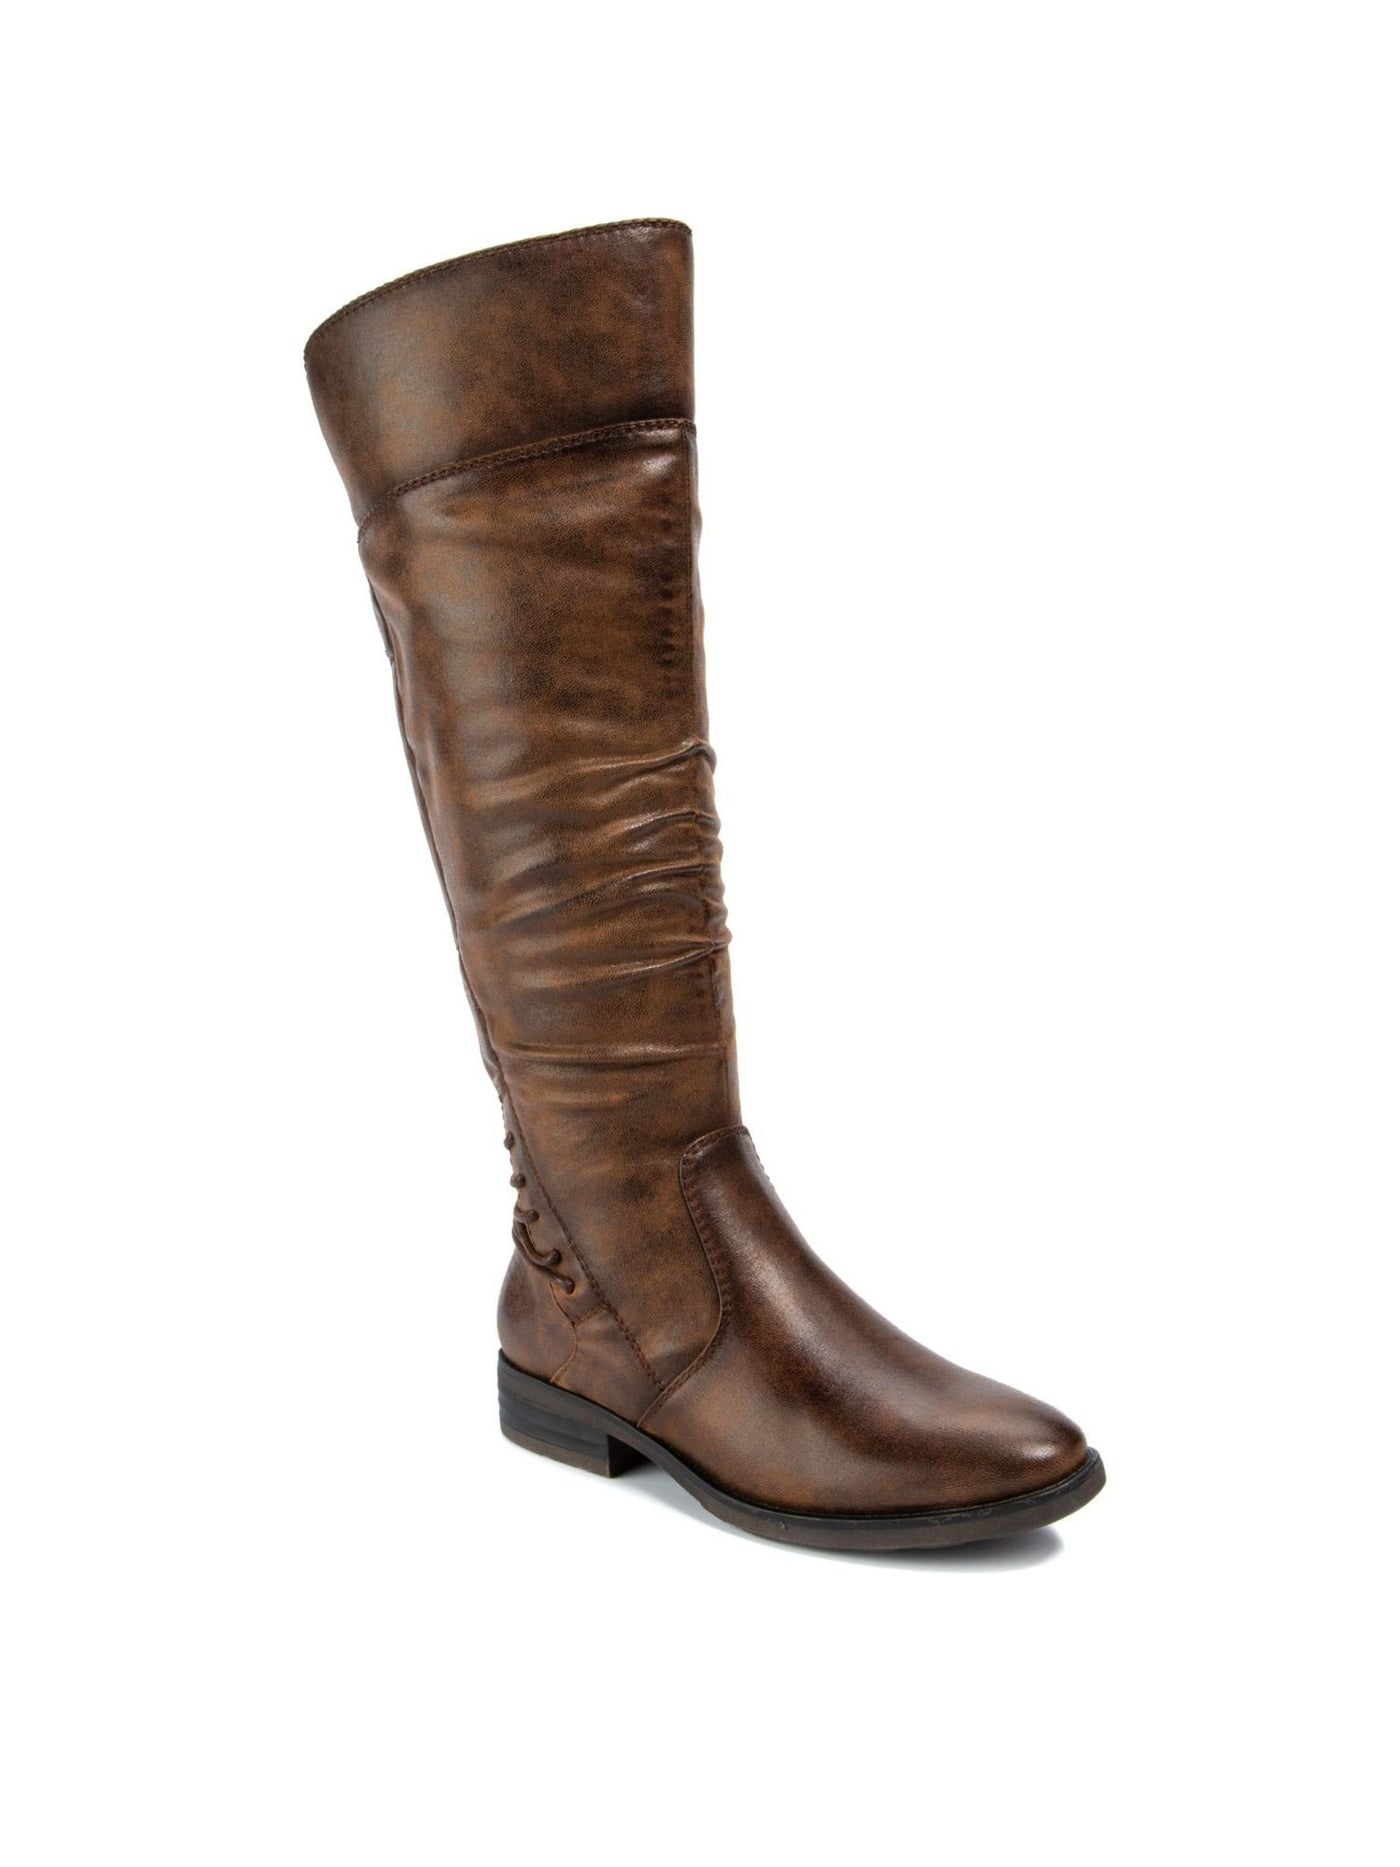 BARETRAPS Womens Brush Brown Laced Zipper Goring Cushioned Ruched Averil Round Toe Block Heel Riding Boot 7 M